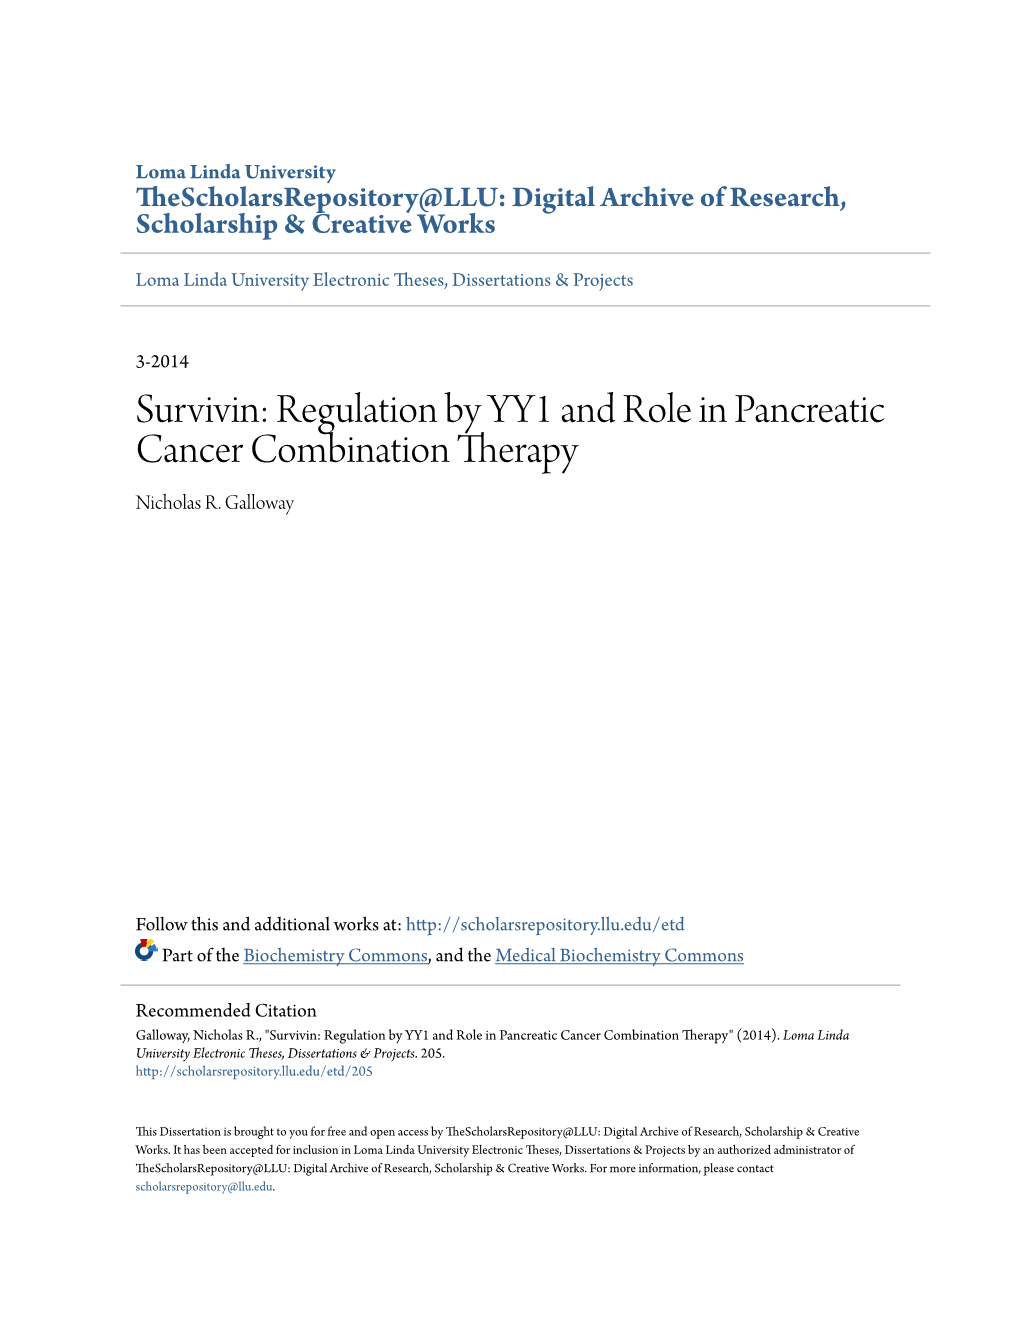 Survivin: Regulation by YY1 and Role in Pancreatic Cancer Combination Therapy Nicholas R